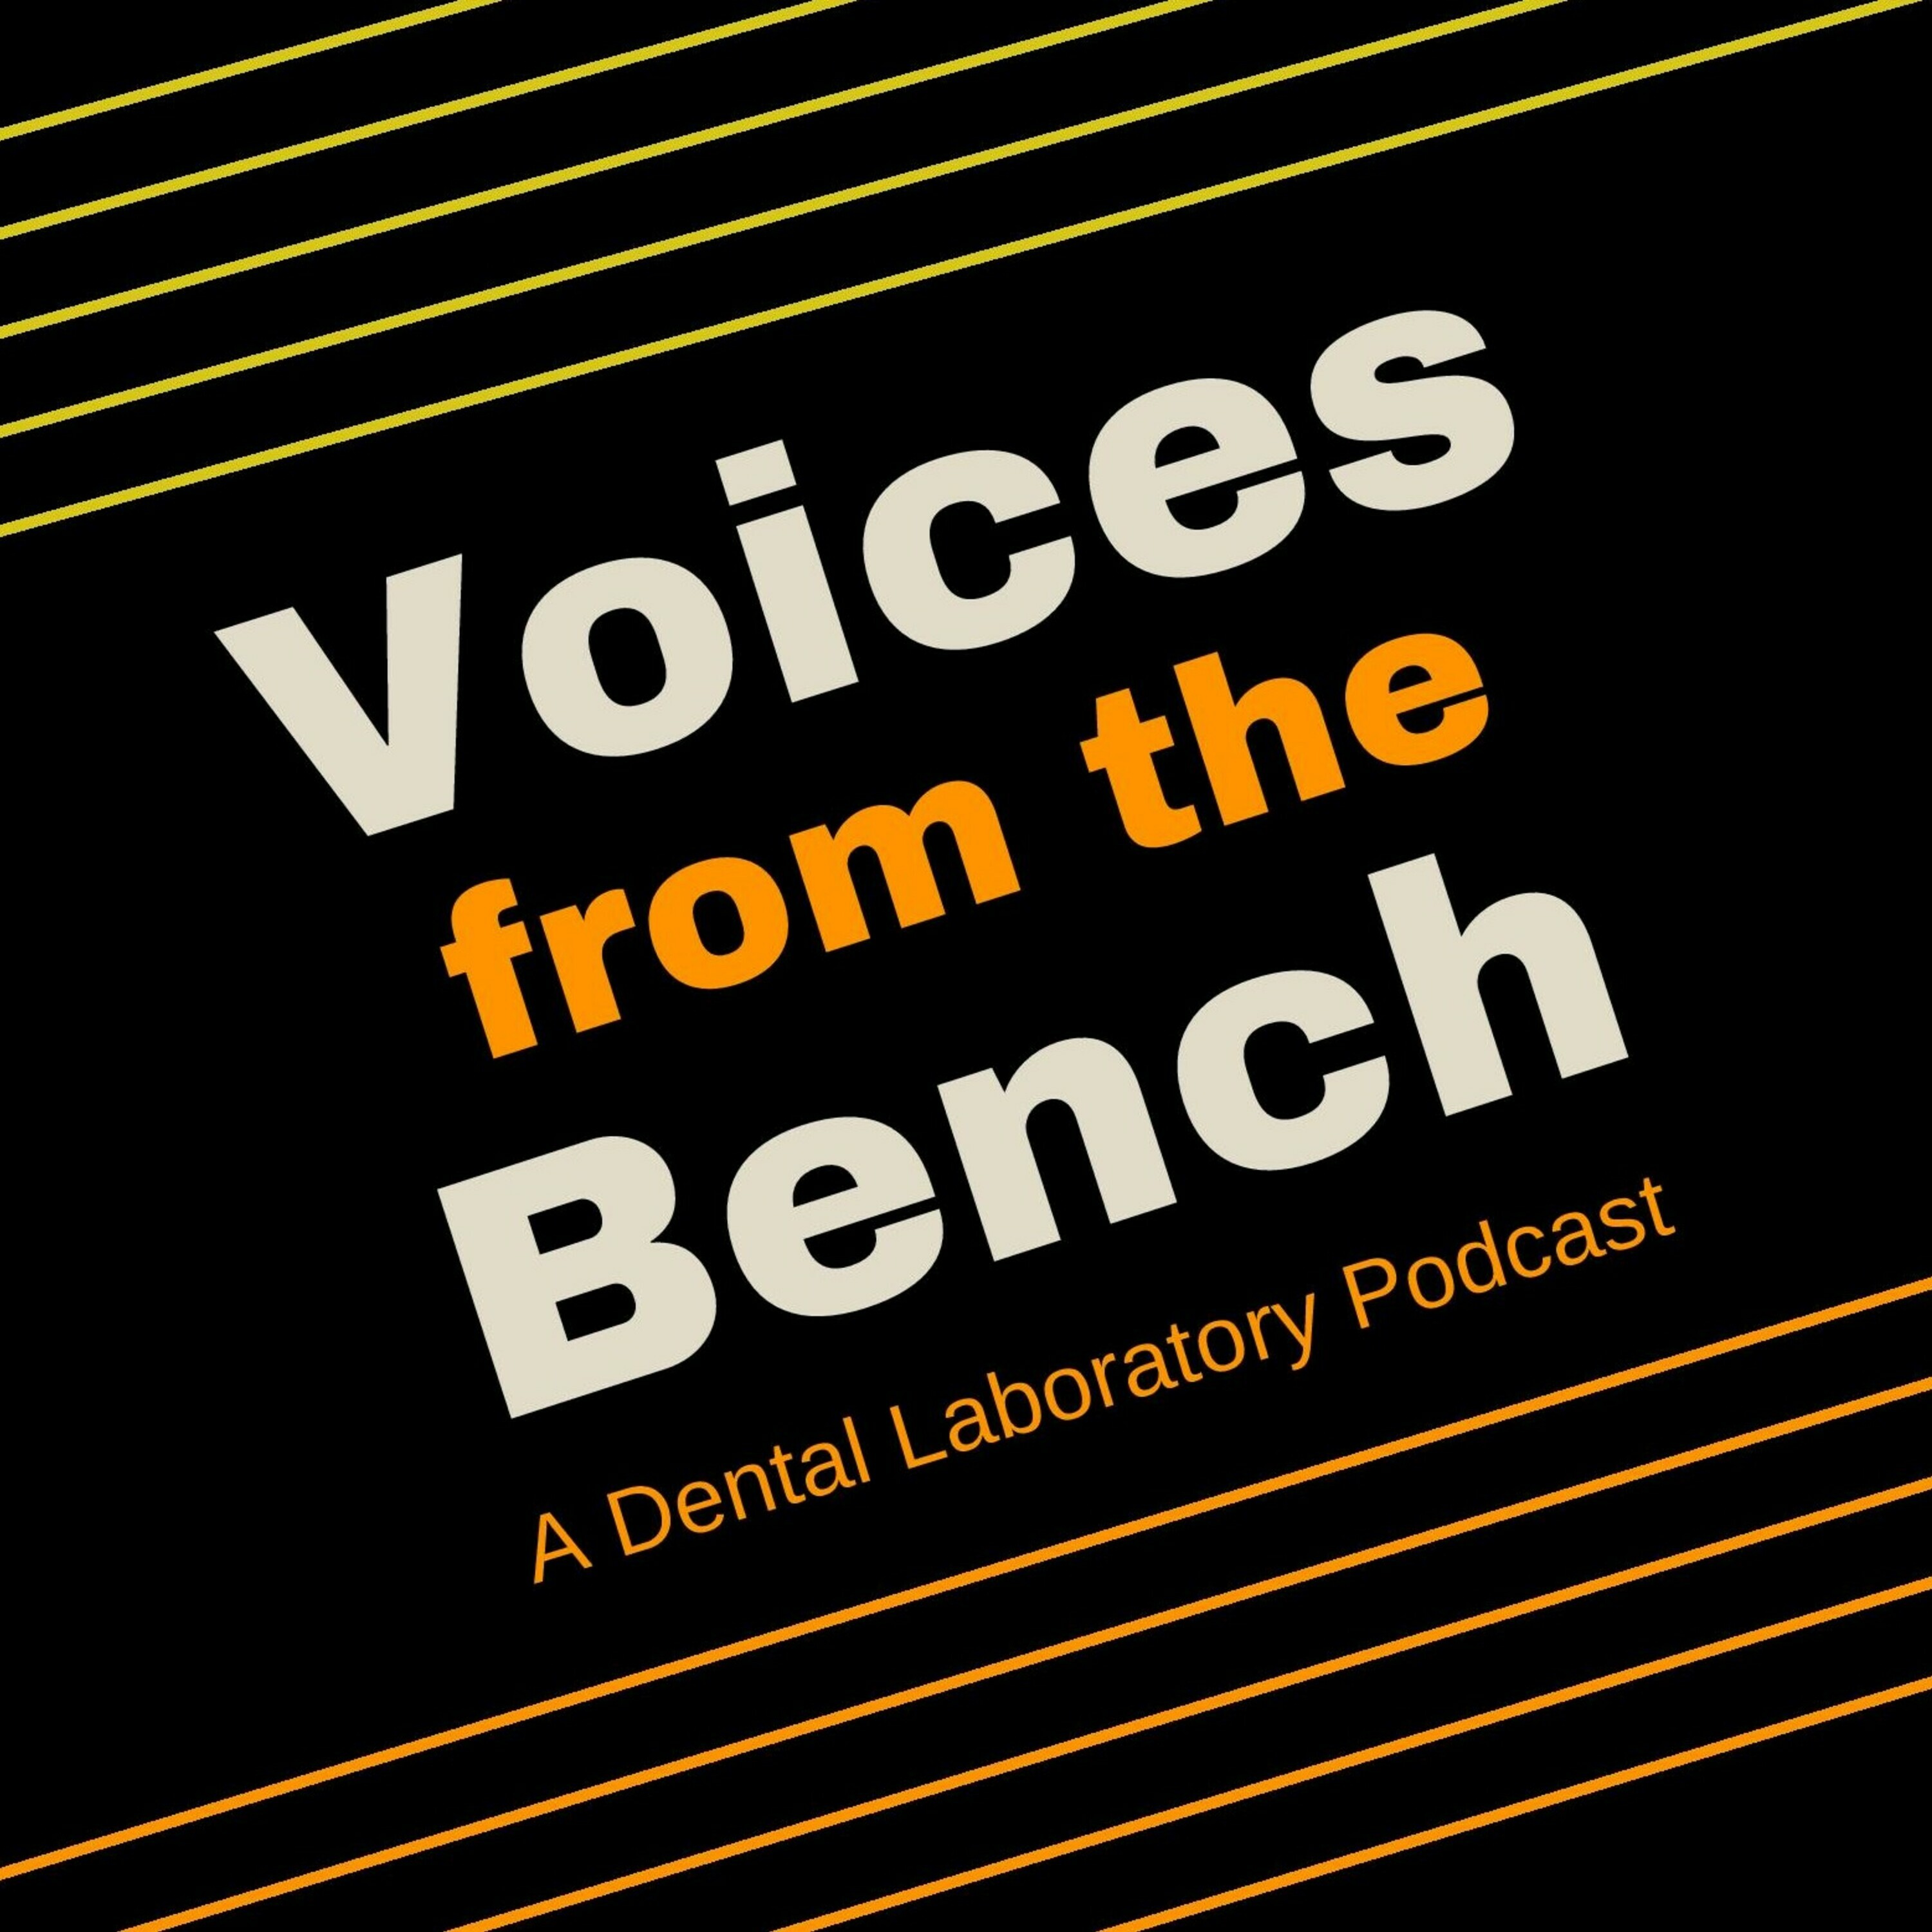 299: The Netflix of Digital Dentistry with Dr. Ahmad Al-Hassiny and iDD